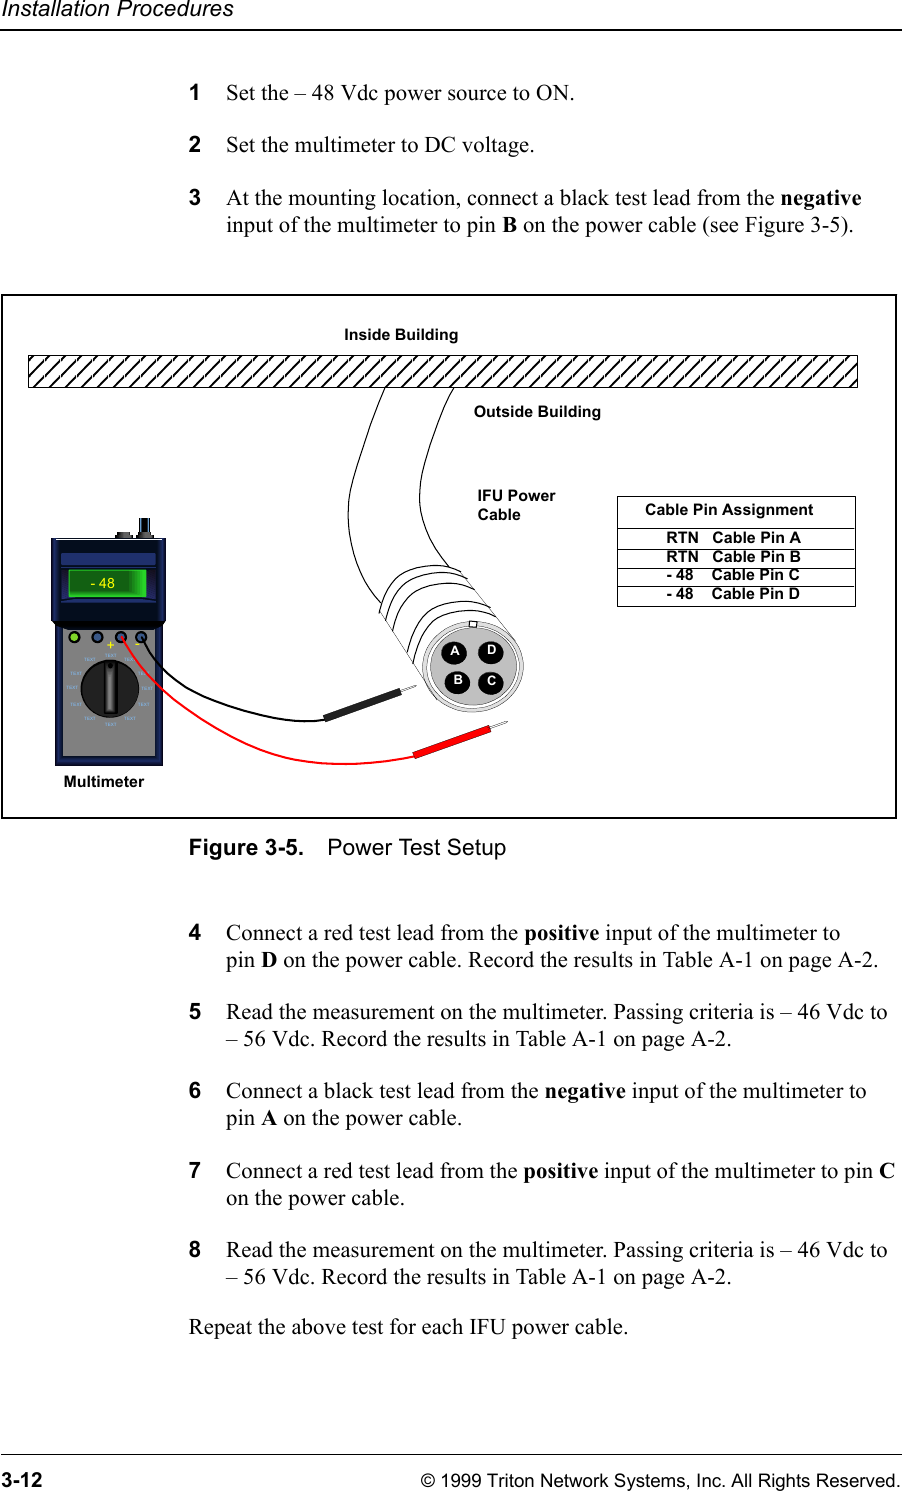 Installation Procedures3-12 © 1999 Triton Network Systems, Inc. All Rights Reserved.1Set the – 48 Vdc power source to ON.2Set the multimeter to DC voltage.3At the mounting location, connect a black test lead from the negative input of the multimeter to pin B on the power cable (see Figure 3-5).Figure 3-5. Power Test Setup4Connect a red test lead from the positive input of the multimeter to pin D on the power cable. Record the results in Table A-1 on page A-2.5Read the measurement on the multimeter. Passing criteria is – 46 Vdc to – 56 Vdc. Record the results in Table A-1 on page A-2.6Connect a black test lead from the negative input of the multimeter to pin A on the power cable.7Connect a red test lead from the positive input of the multimeter to pin C on the power cable.8Read the measurement on the multimeter. Passing criteria is – 46 Vdc to – 56 Vdc. Record the results in Table A-1 on page A-2.Repeat the above test for each IFU power cable.TEXTTEXTTEXT TEXTTEXT TEXTTEXT TEXTTEXT TEXTTEXTTEXT- 48+- MultimeterRTN   Cable Pin ARTN   Cable Pin B- 48    Cable Pin C- 48    Cable Pin DCable Pin AssignmentAIFU Power CableDBCOutside BuildingInside Building